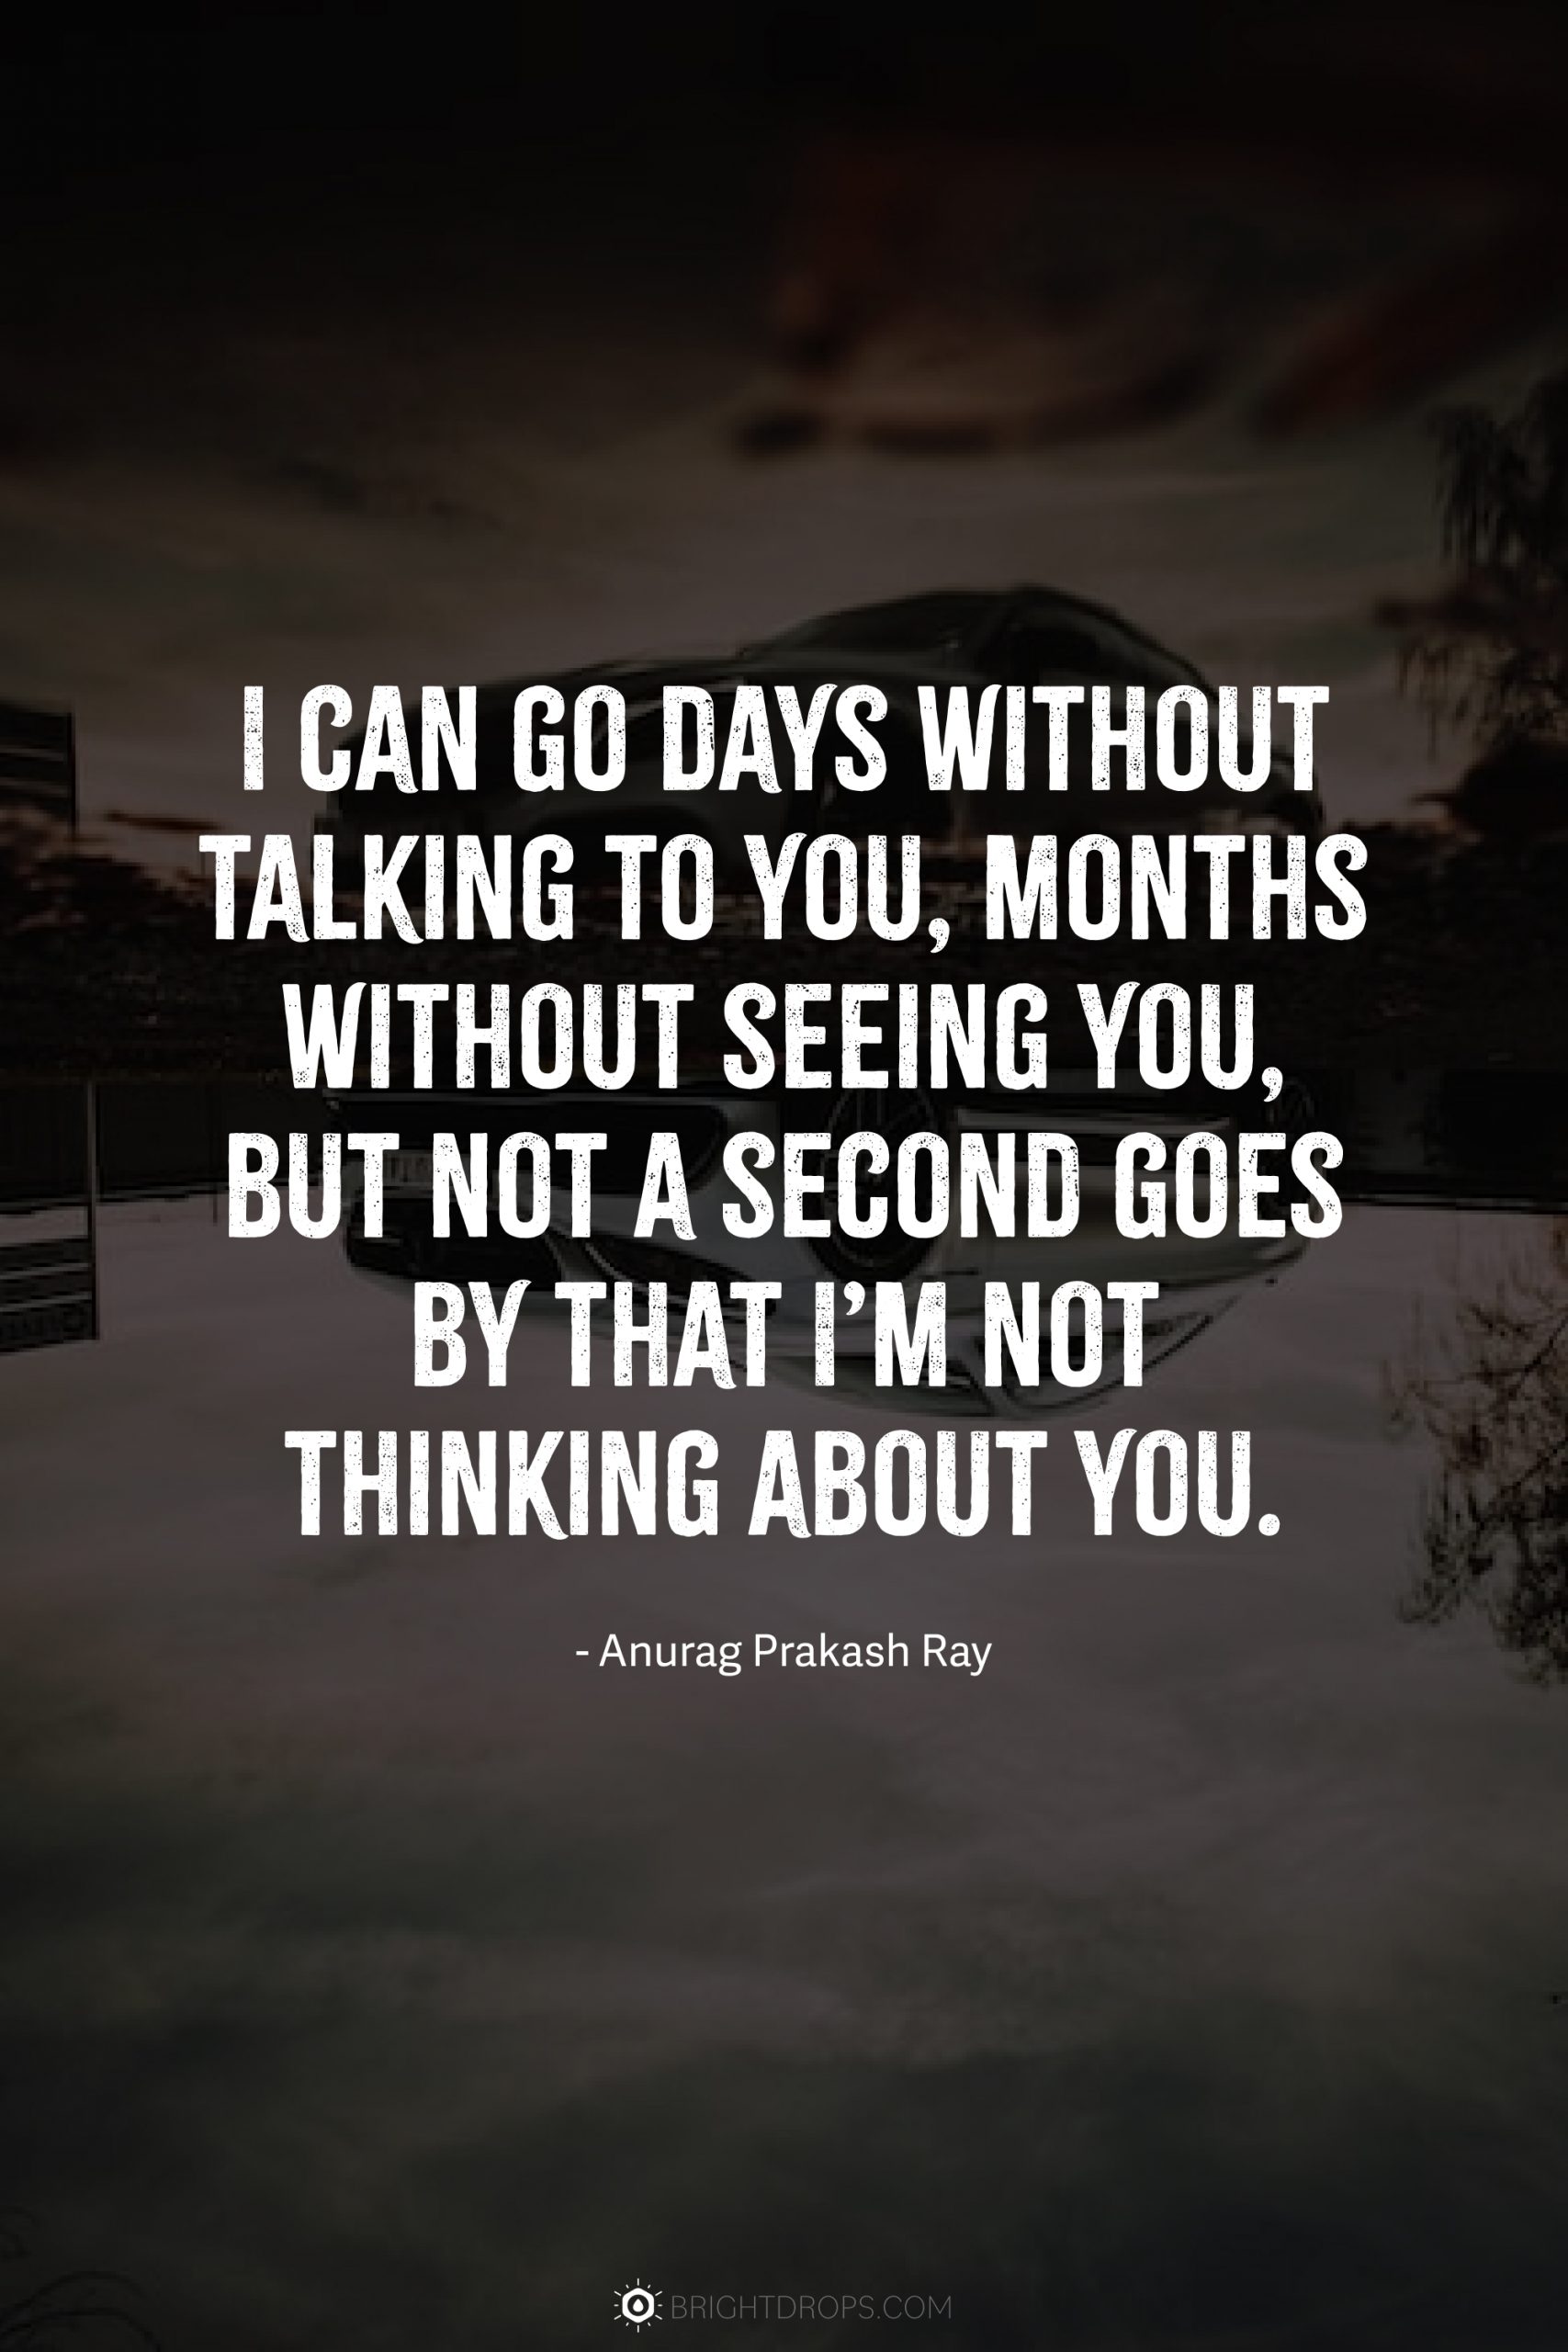 I can go days without talking to you, months without seeing you, but not a second goes by that I’m not thinking about you.